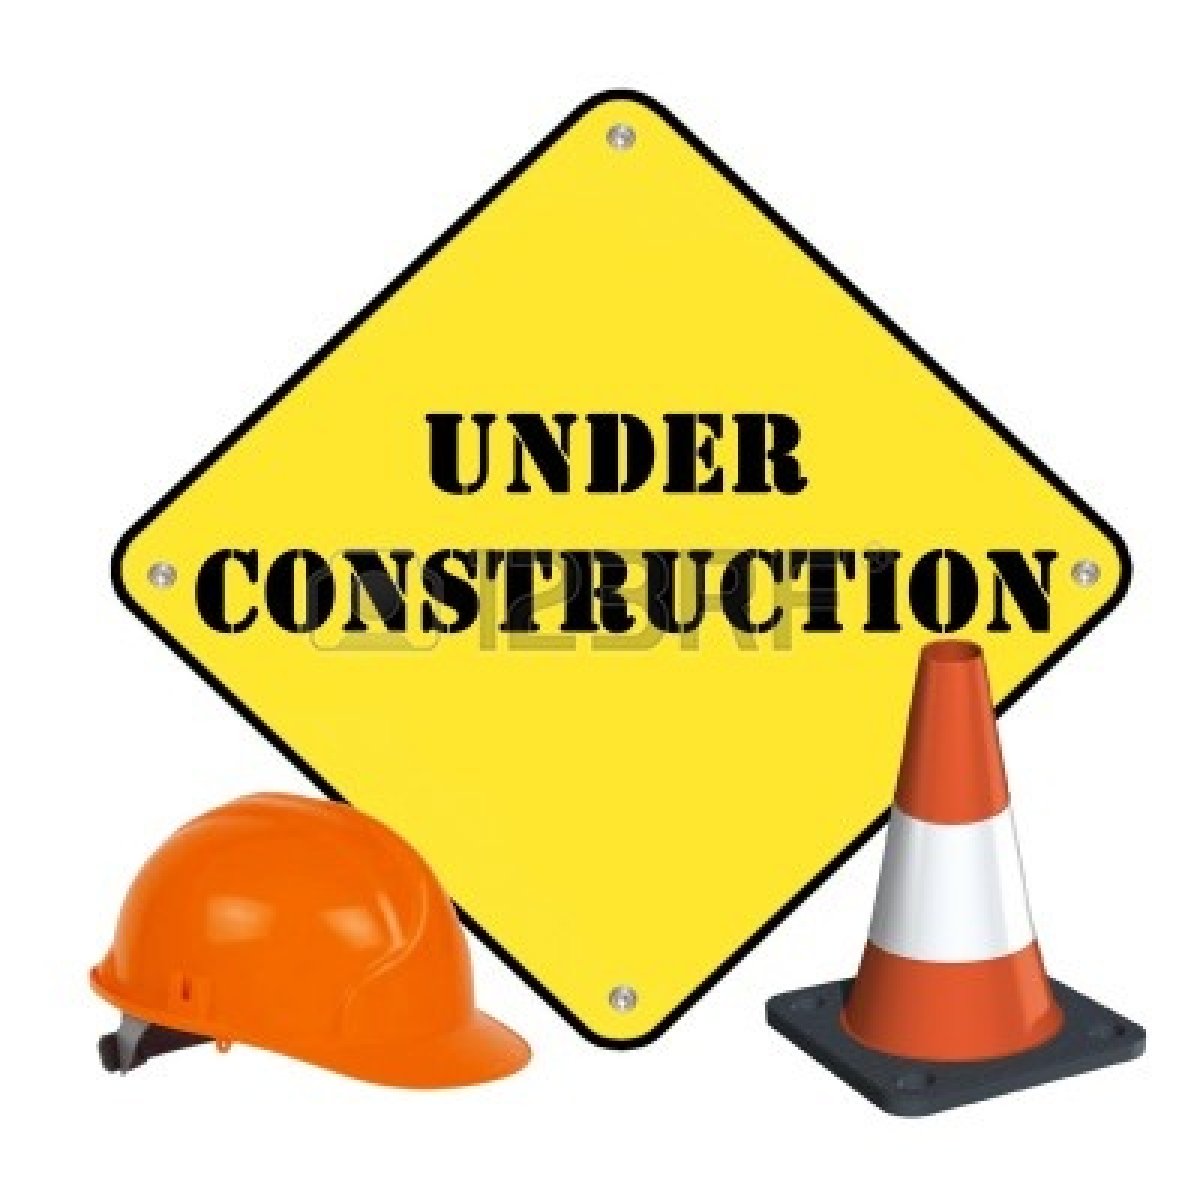 Construction clipart free christmas; Under Construction Clipart - Free Clipart Images ...